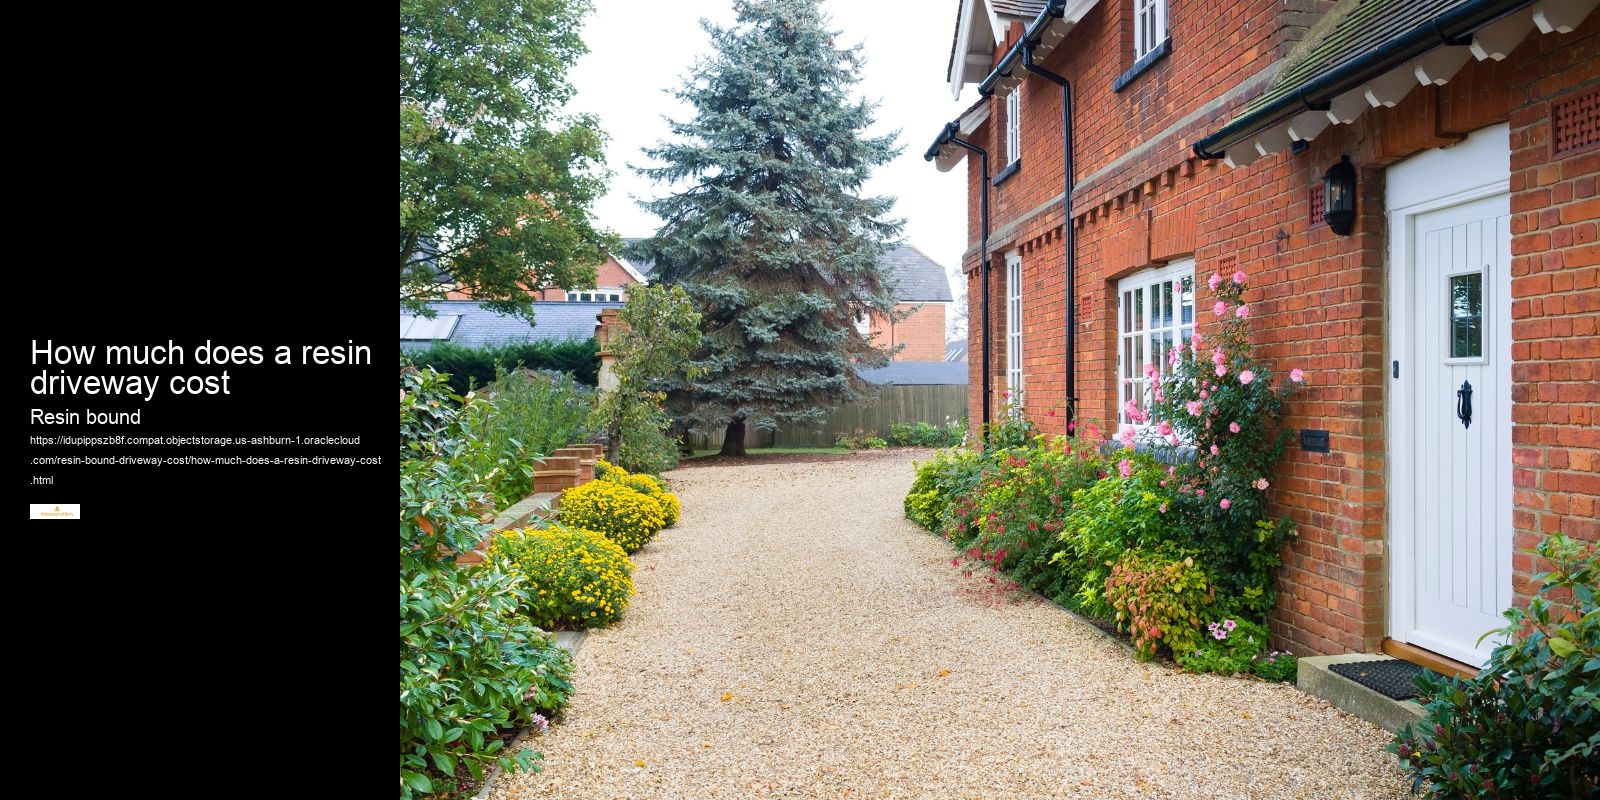 How much does a resin driveway cost